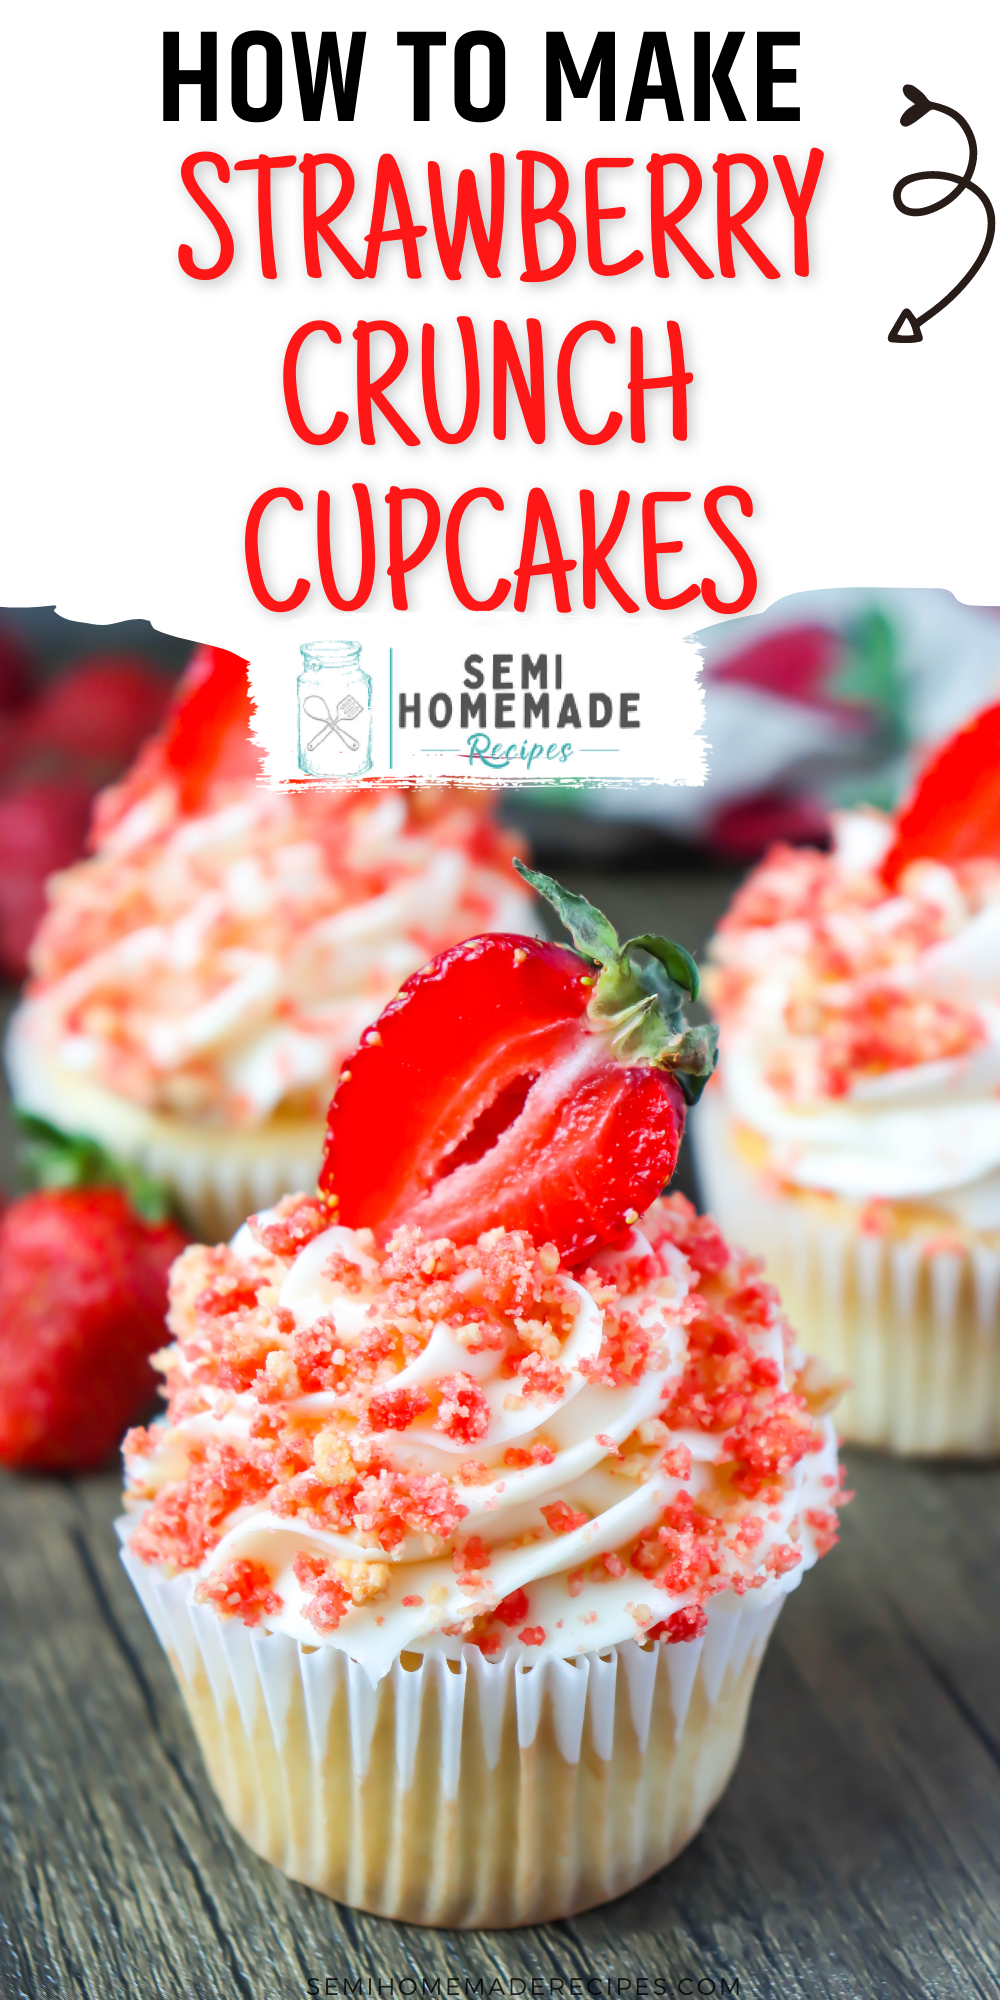 These Strawberry Crunch Cupcakes remind me of those amazing Strawberry Crunch Cupcakes popsicles that we use to get from the ice cream truck as kids! 